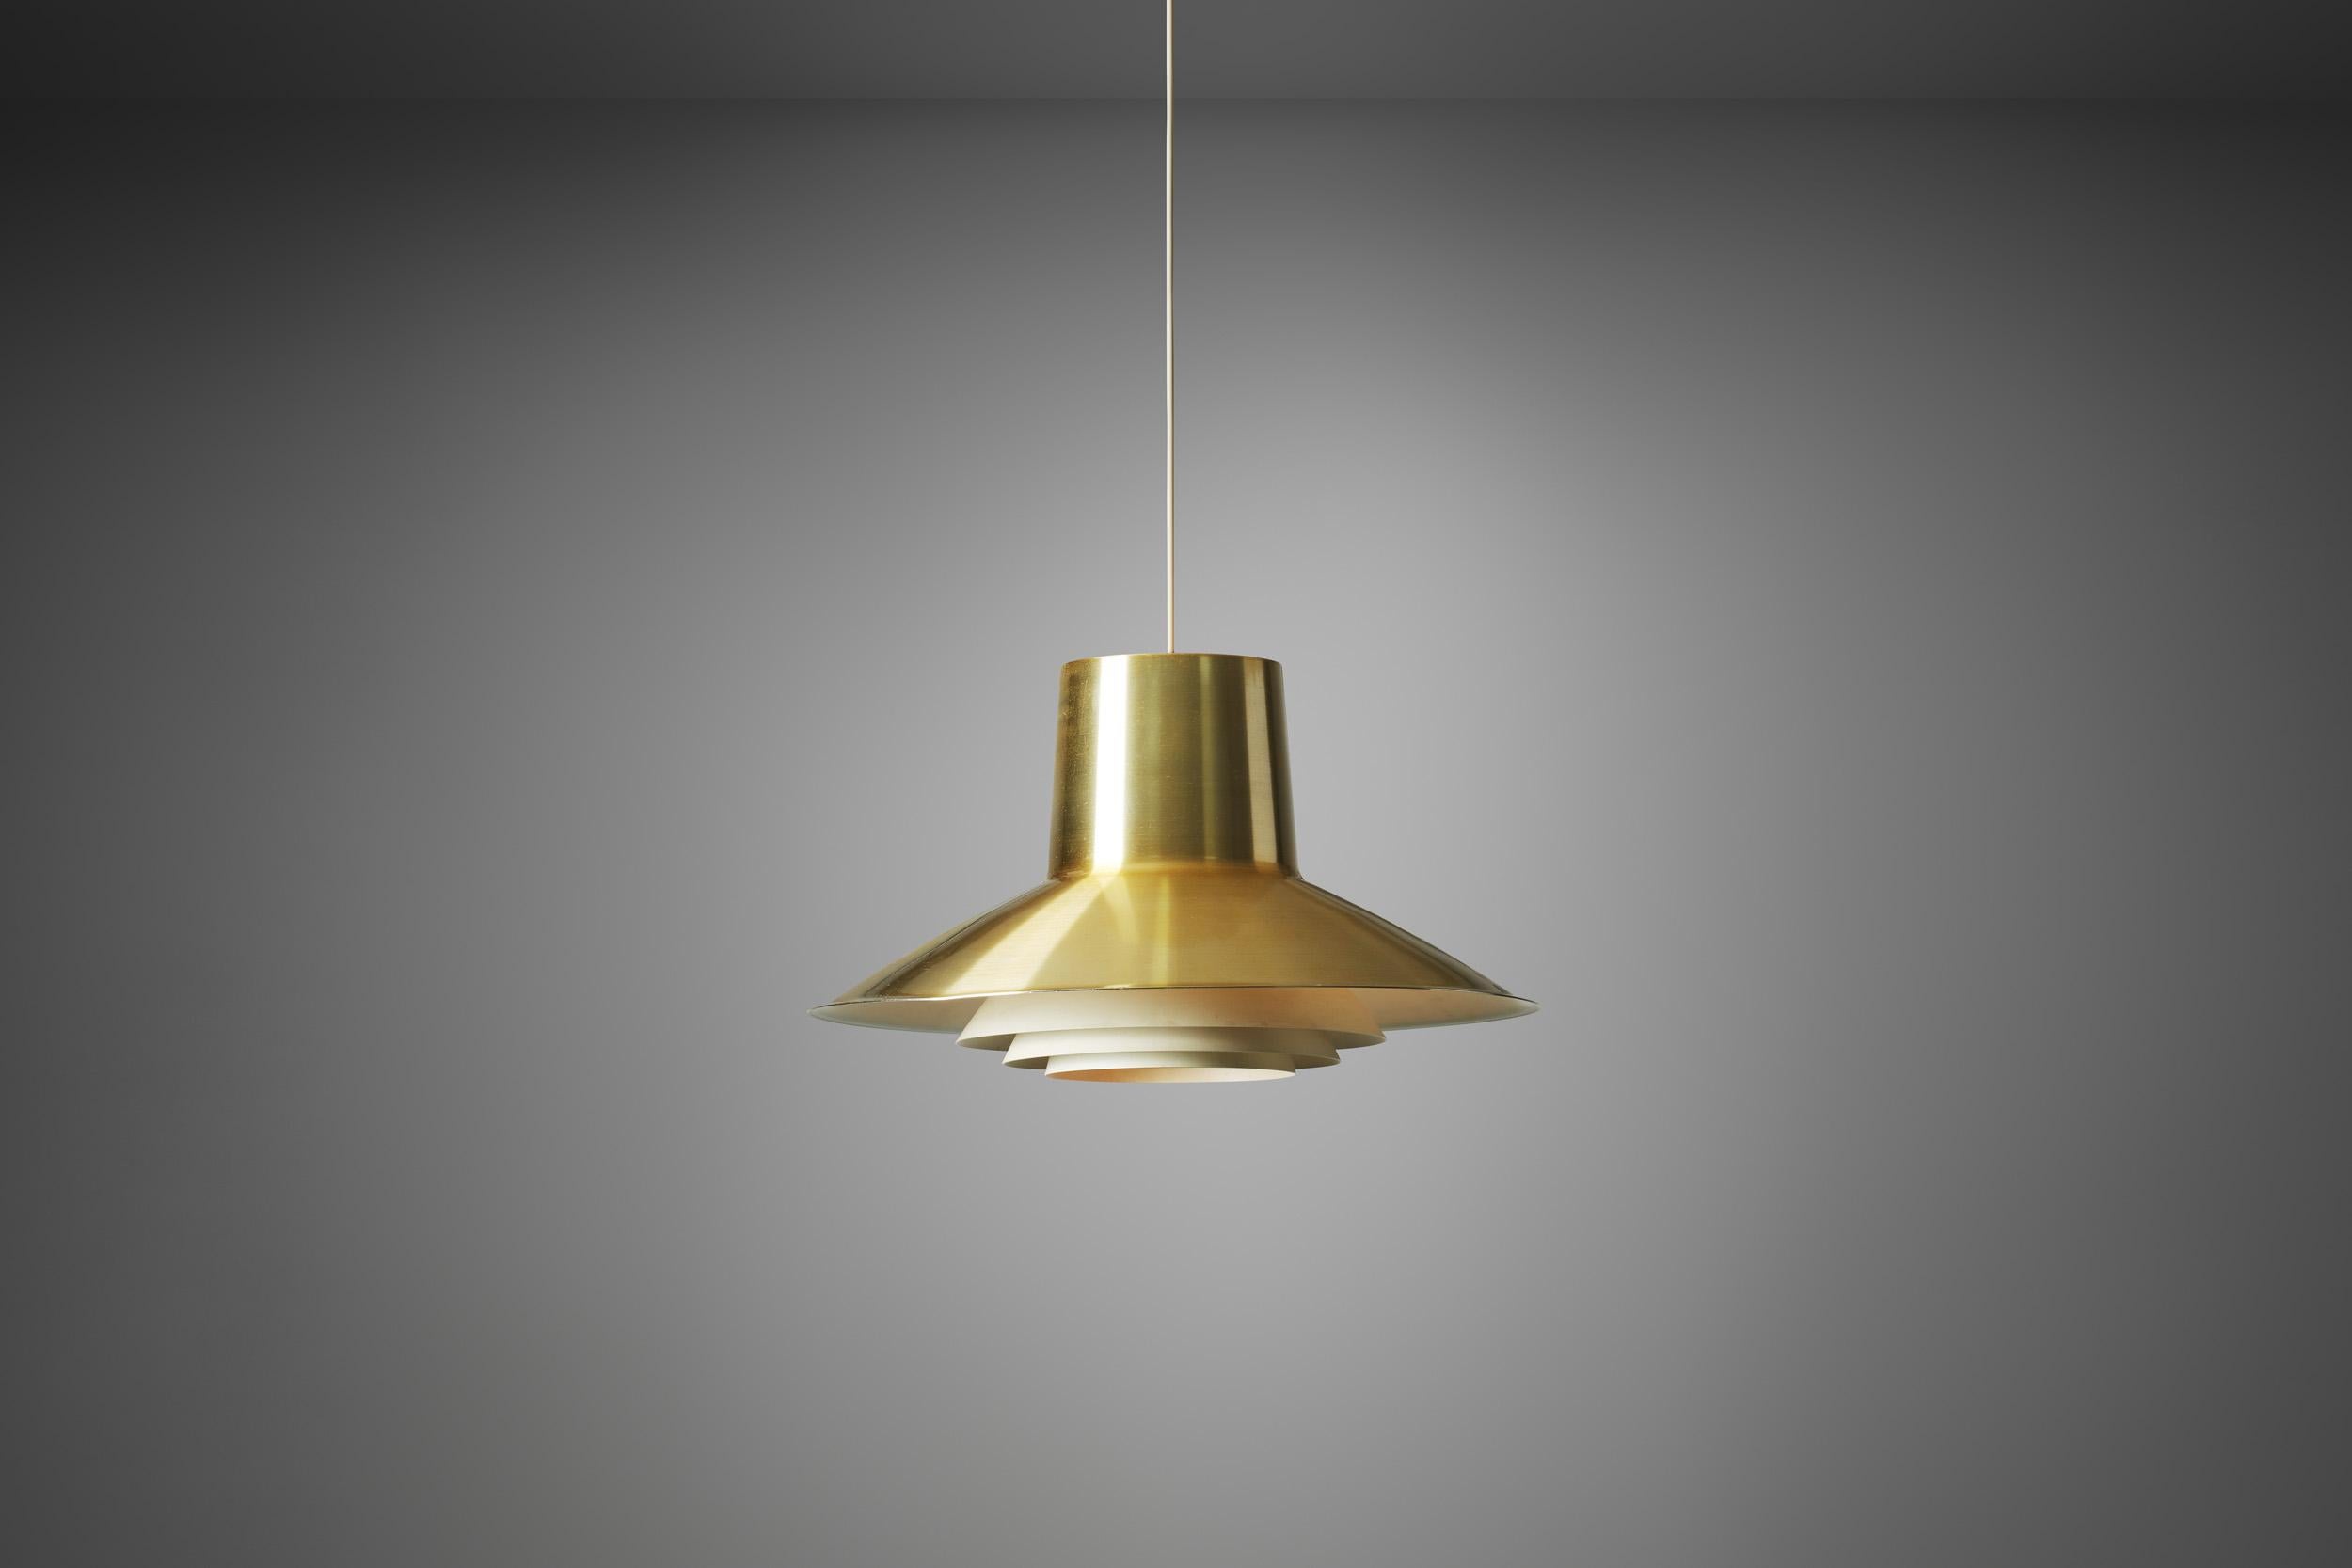 The “Auditorie” series contains three lamps differing in size, this pendant is “Auditorie 3”, the largest one with the most shade layers. Known for its long, elegant neck and multilayered shade system, this rare model is among Svend Middelboe’s most